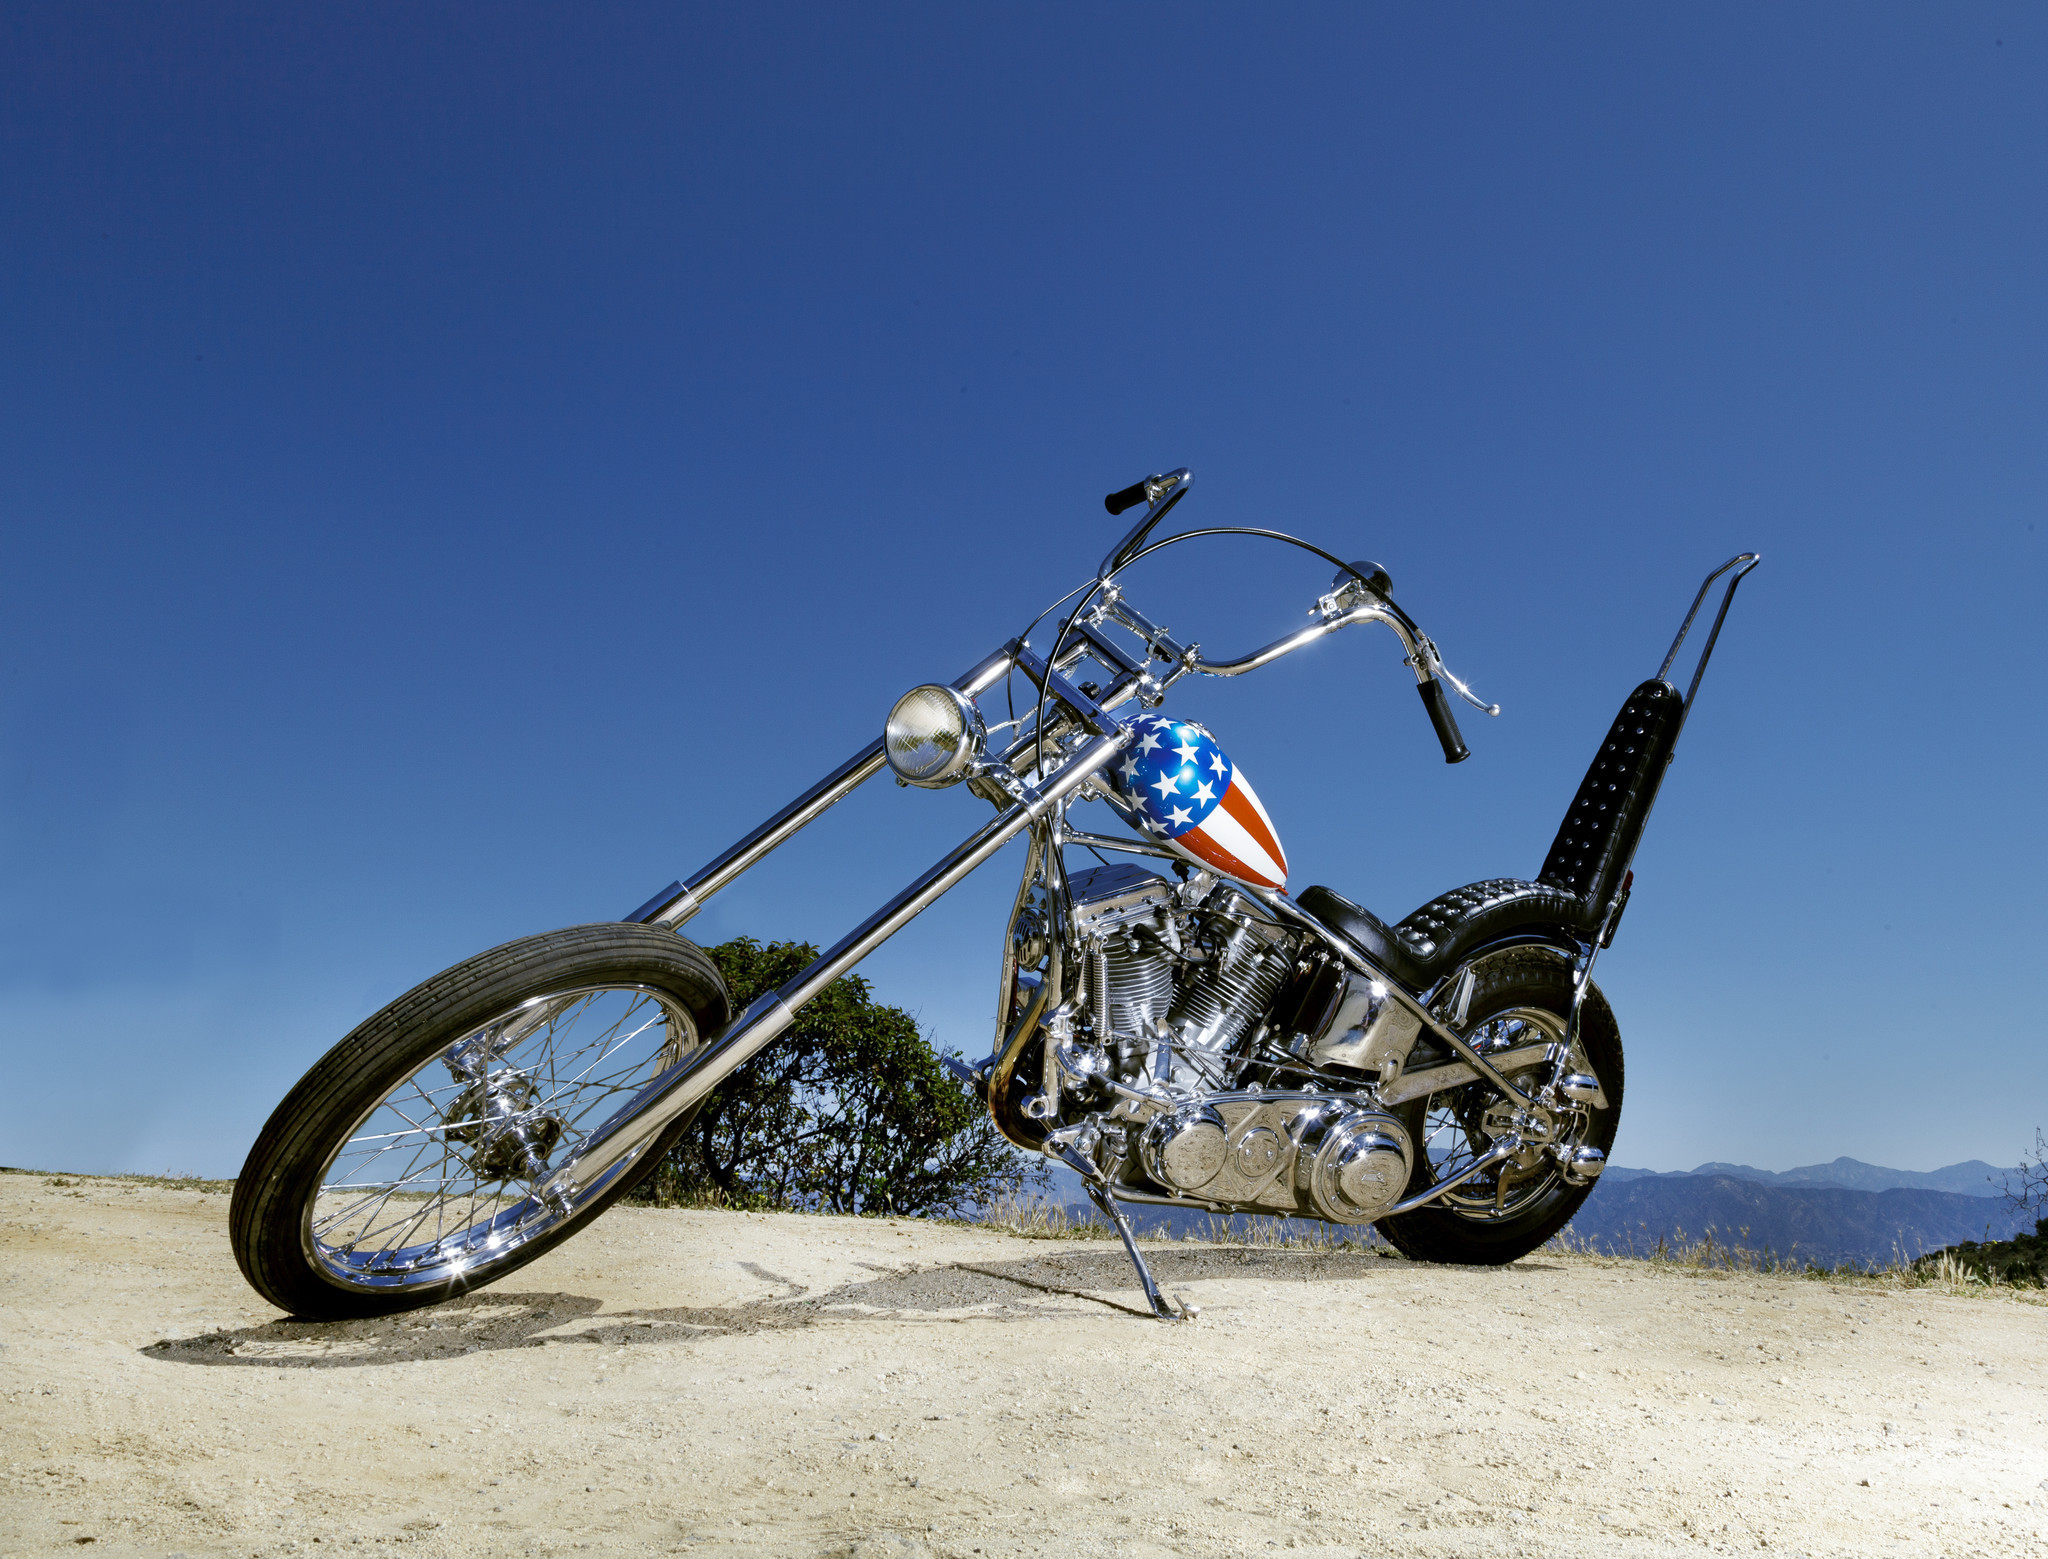 2048x1559 'Easy Rider's' 'Captain America' motorcycle headed to auction - LA Times